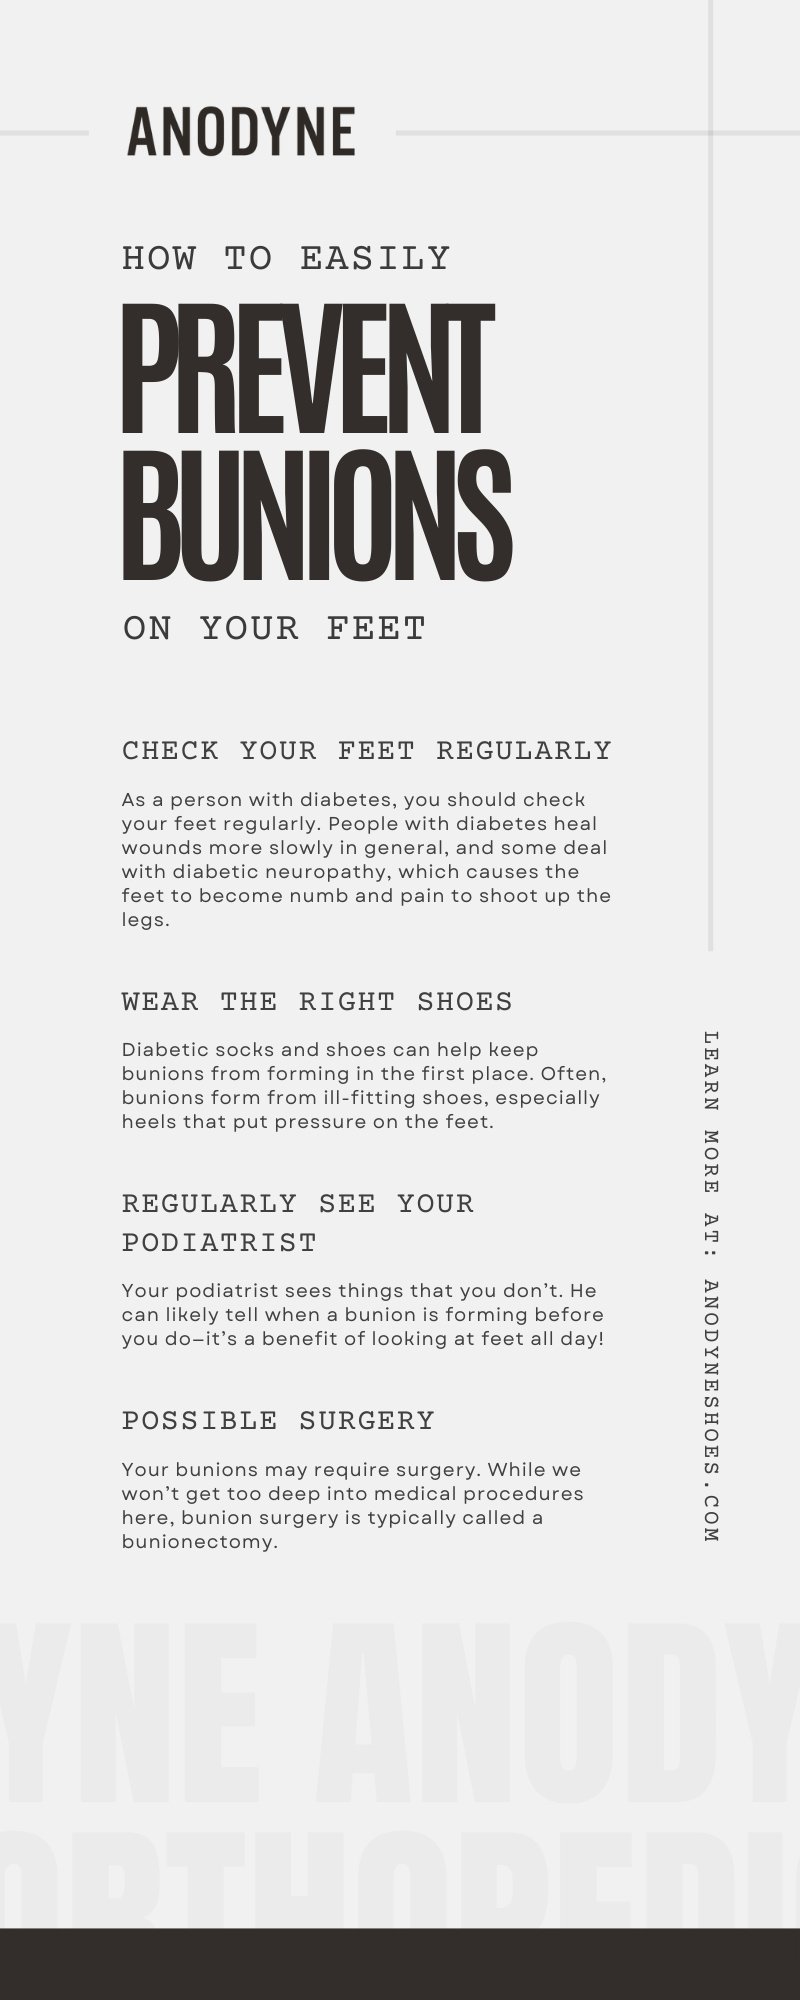 How To Easily Prevent Bunions on Your Feet